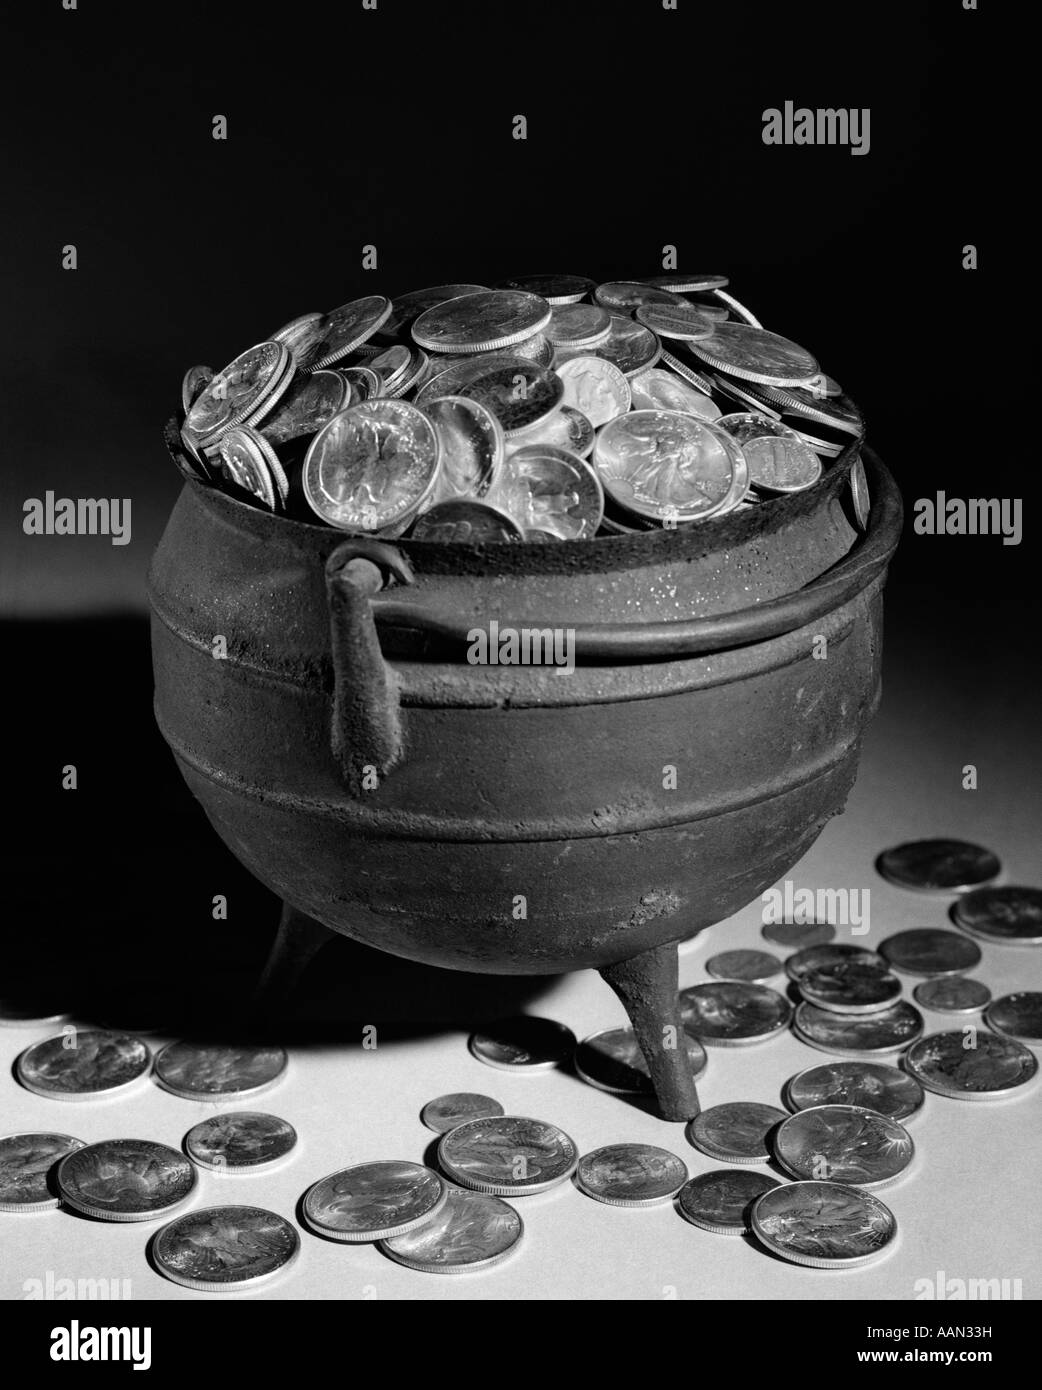 1950s IRON POT OVERFLOWING WITH COINS Stock Photo